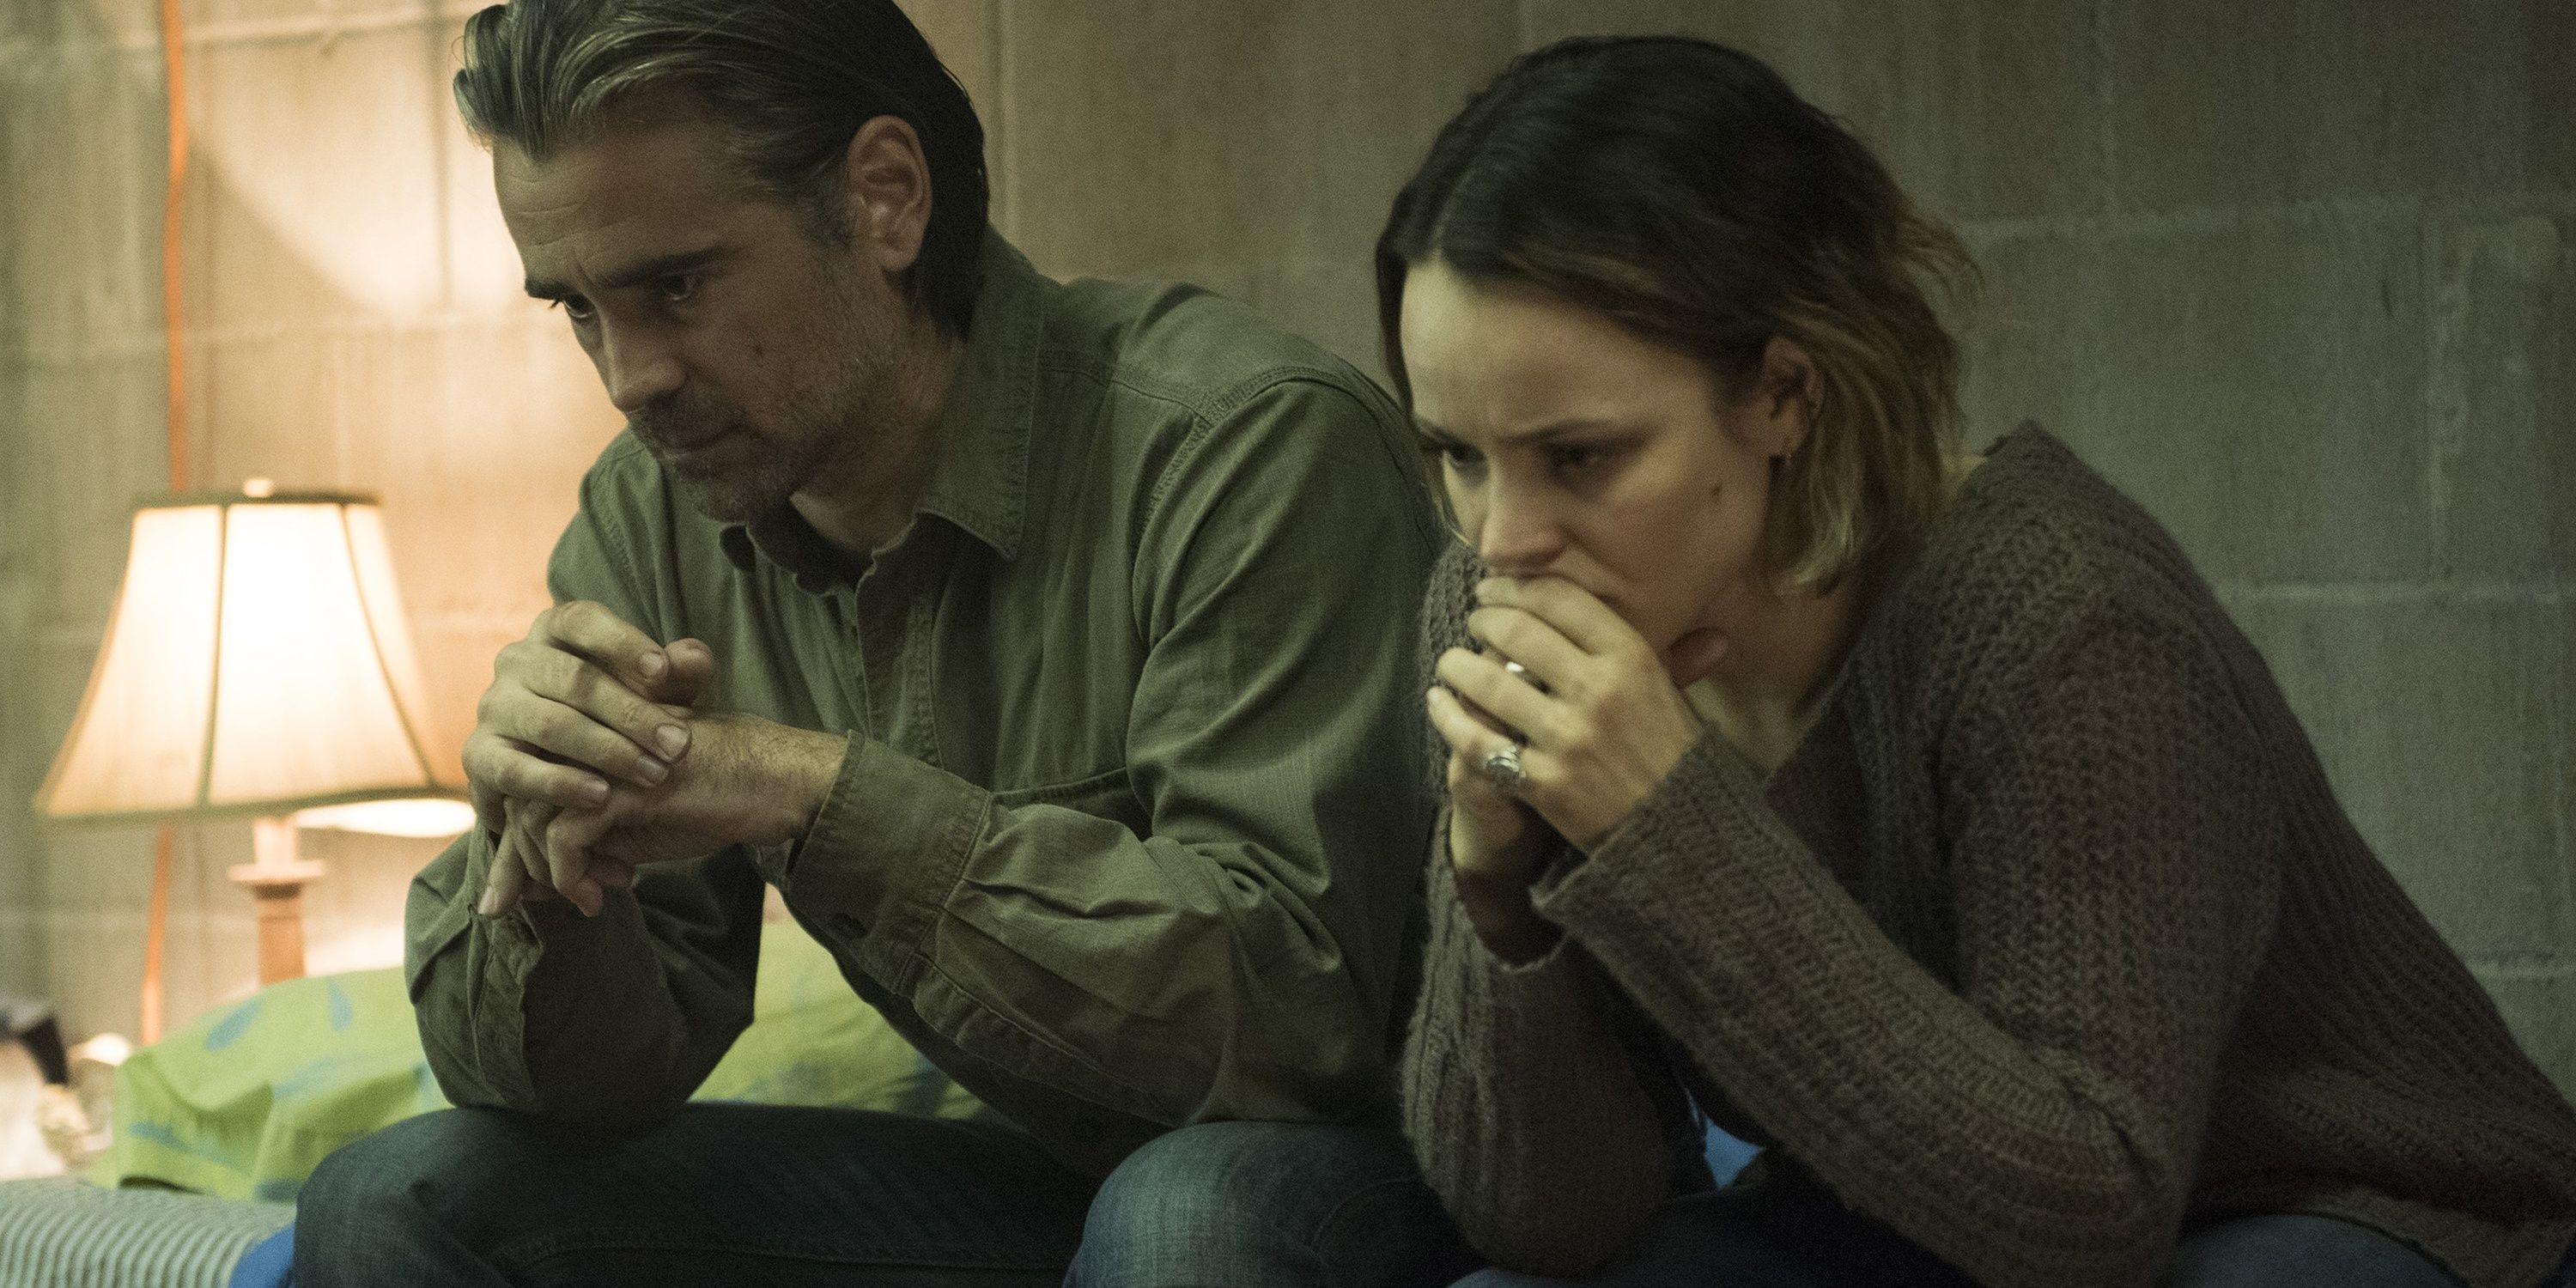 Colin Farrel as Ray and Rachel McAdams as Ani in True Detective season 2 sitting on a couch upset